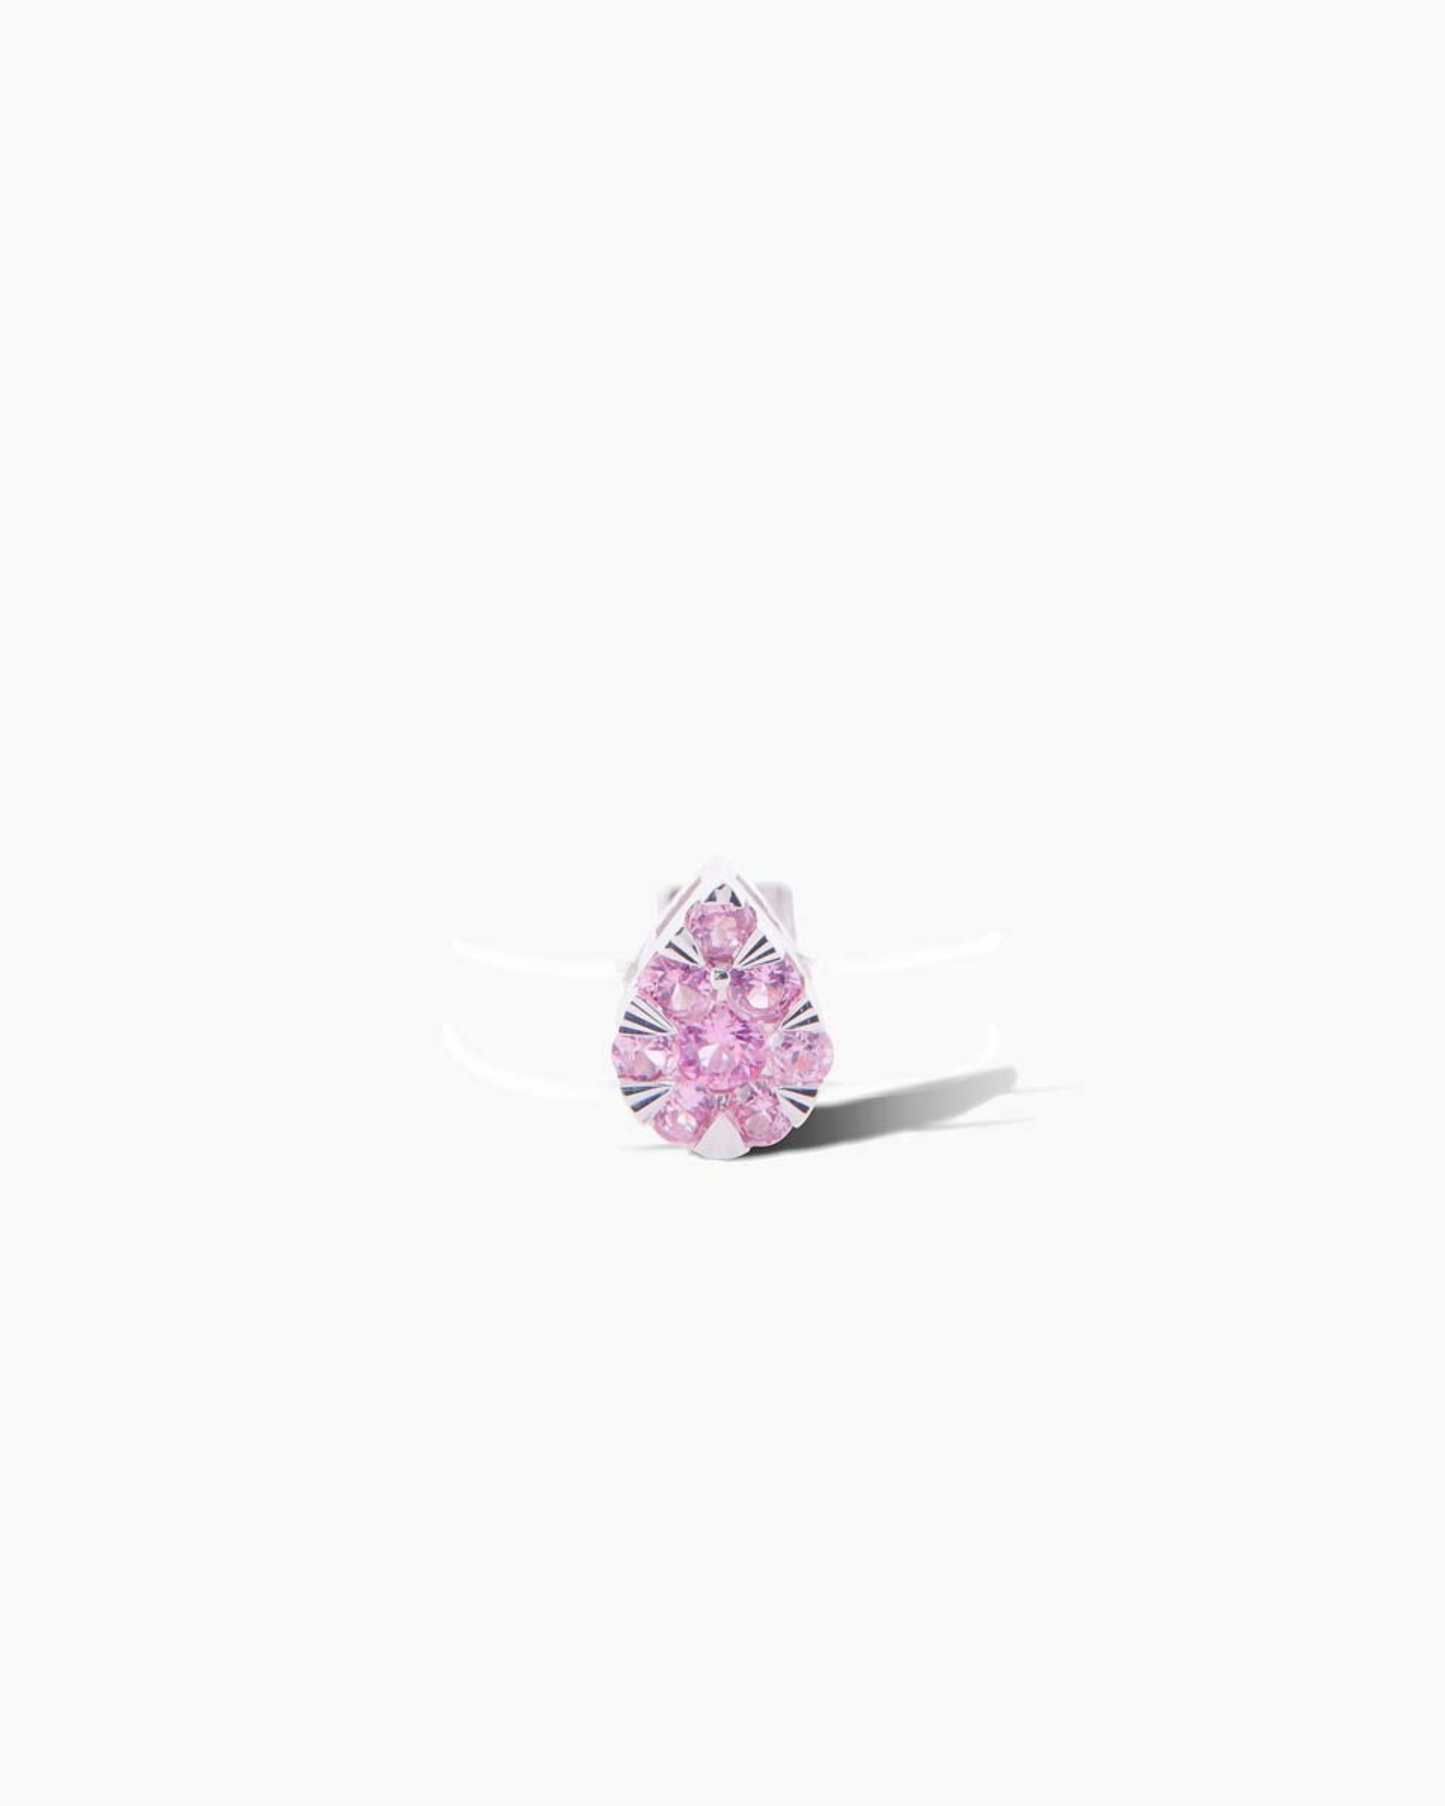 Bague Floating Ring Poire Sapphires rose